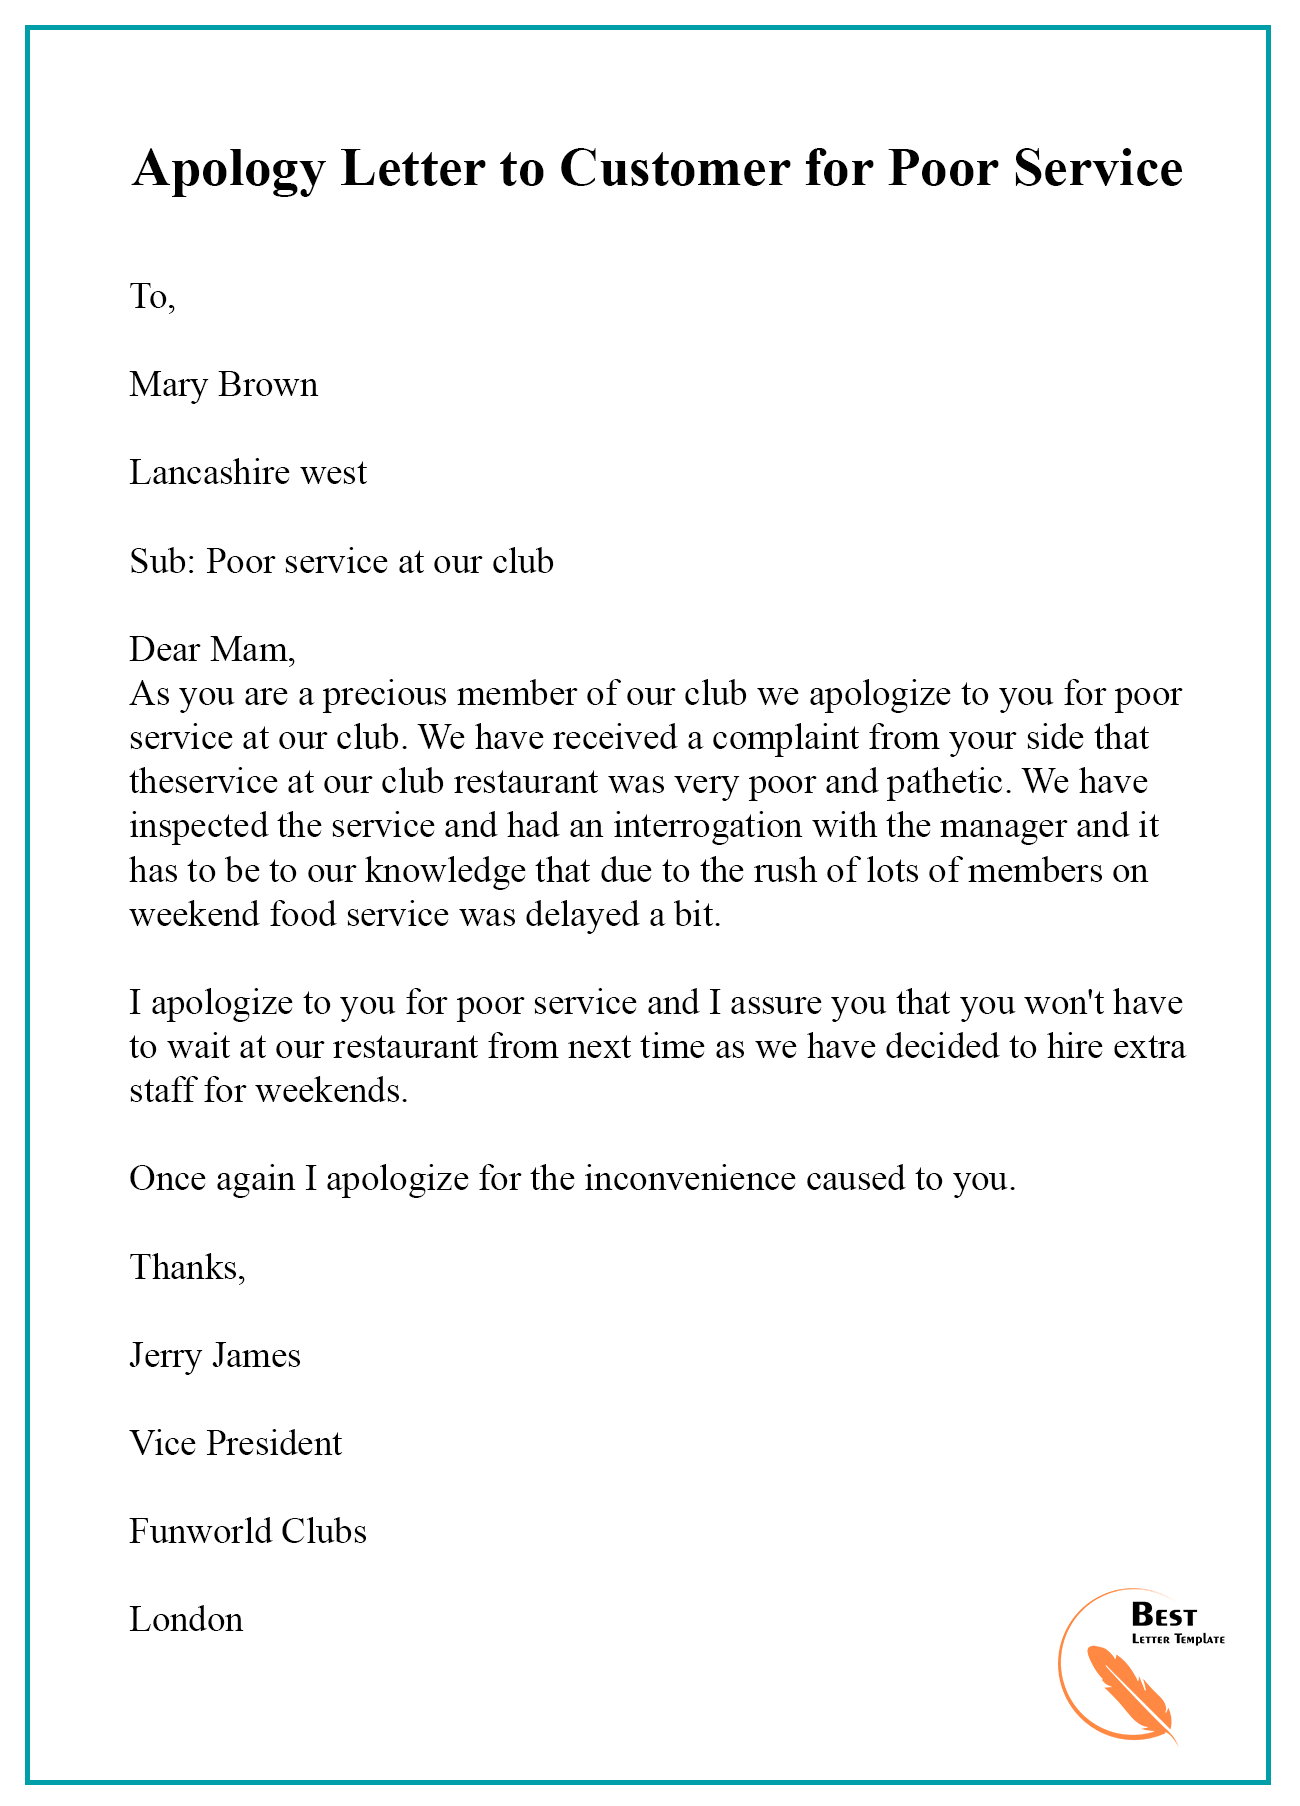 apology letter about bad service